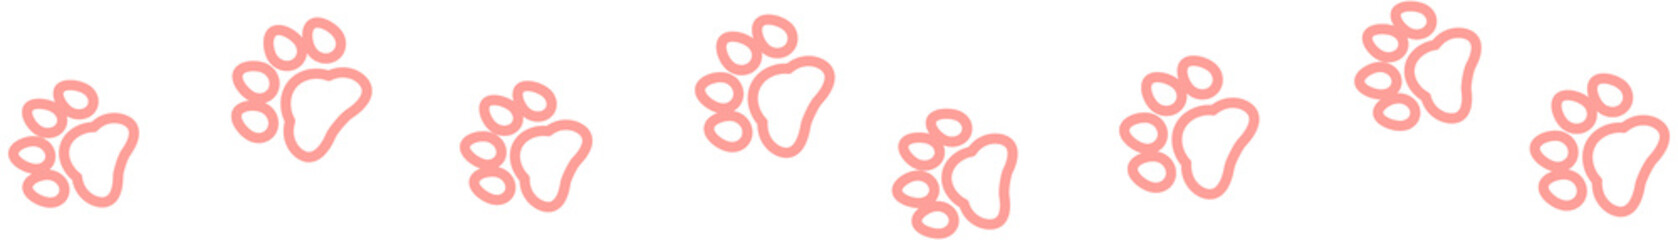 Dog and cat paw print icon